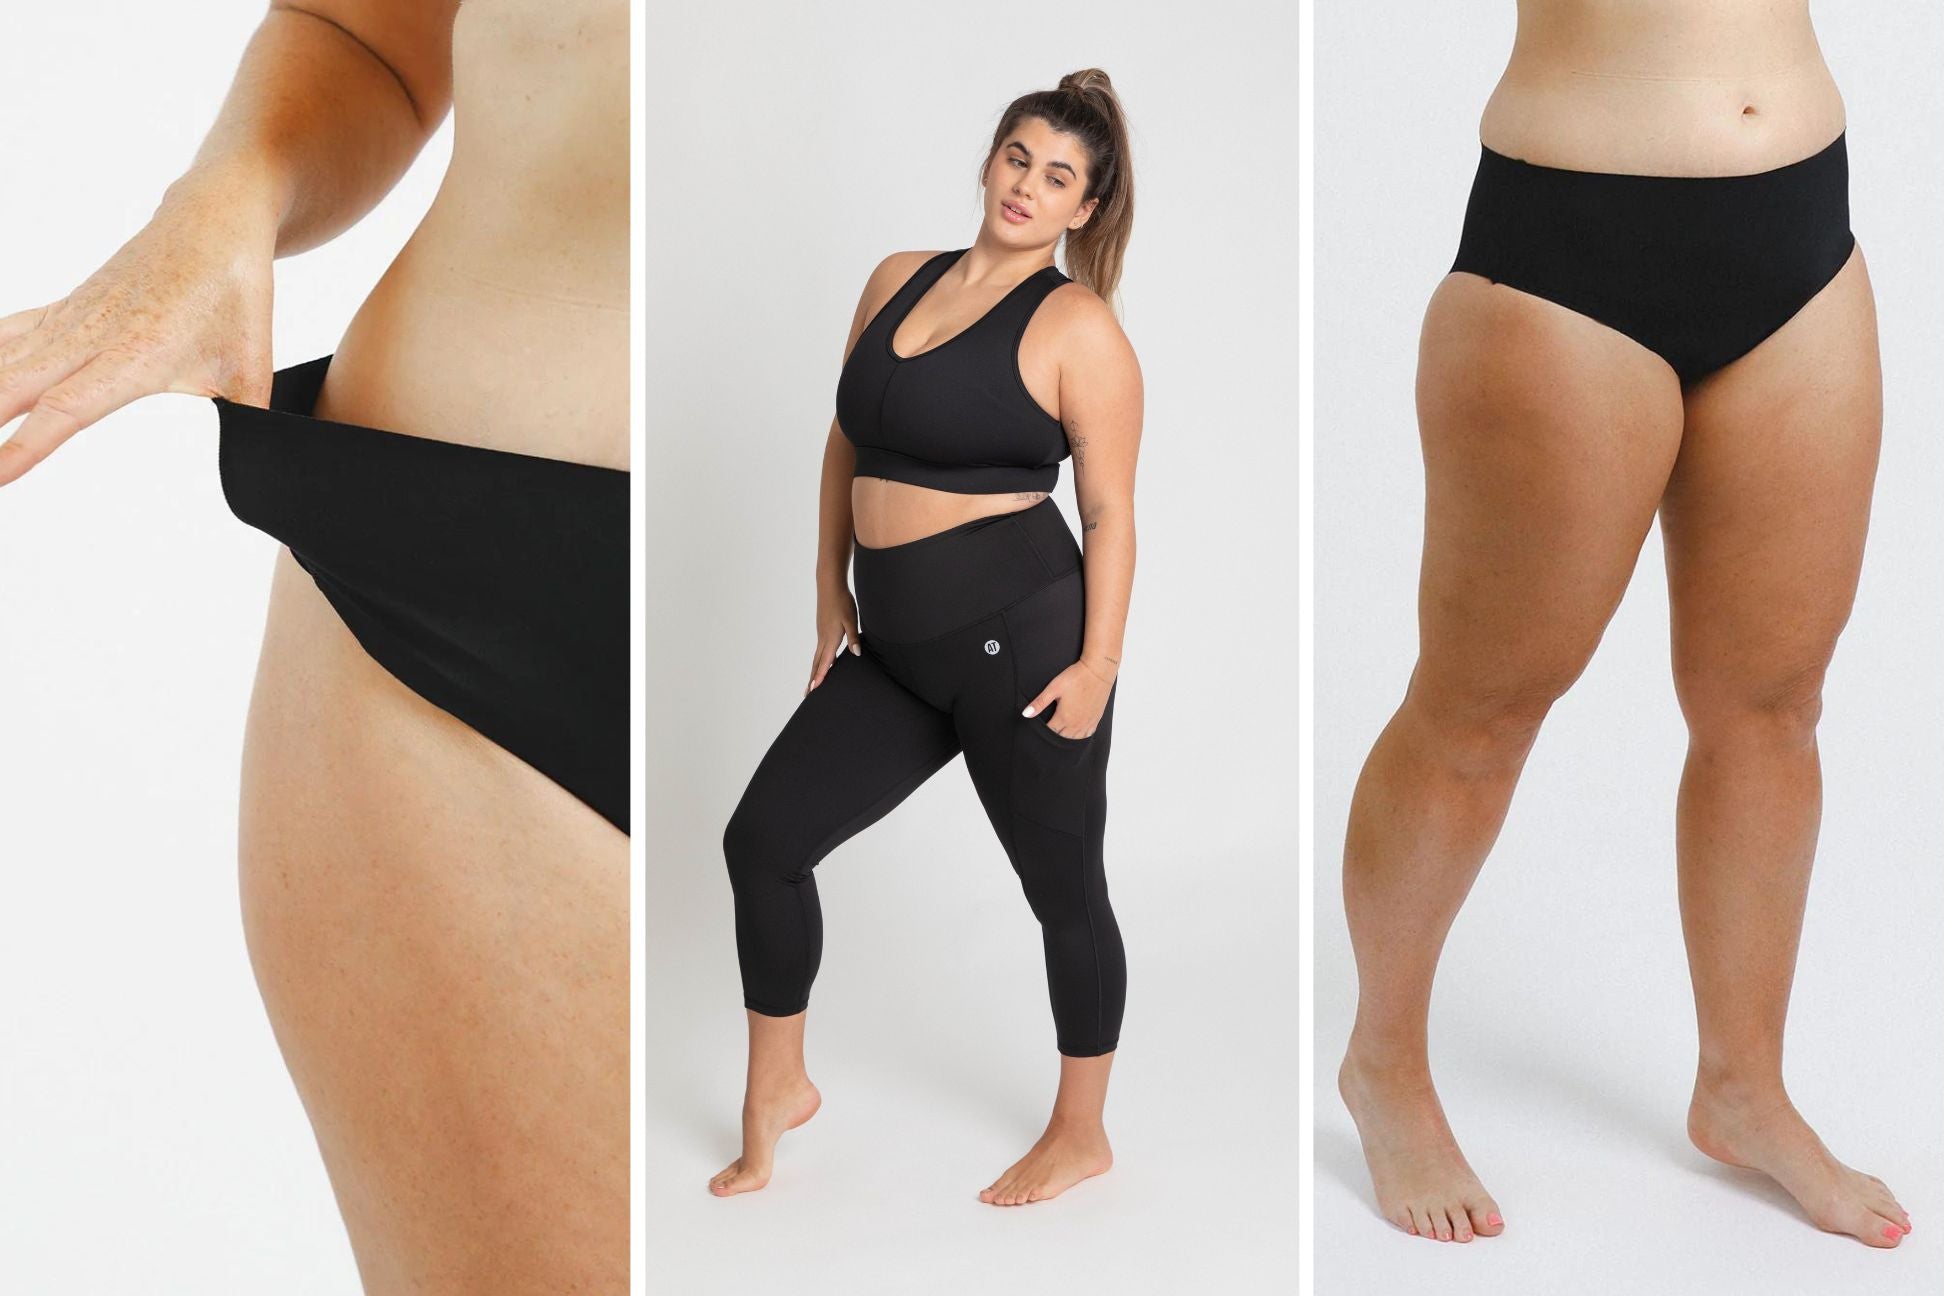 Is it okay to wear a thong instead of a panty under leggings to avoid  pantylines? - Quora